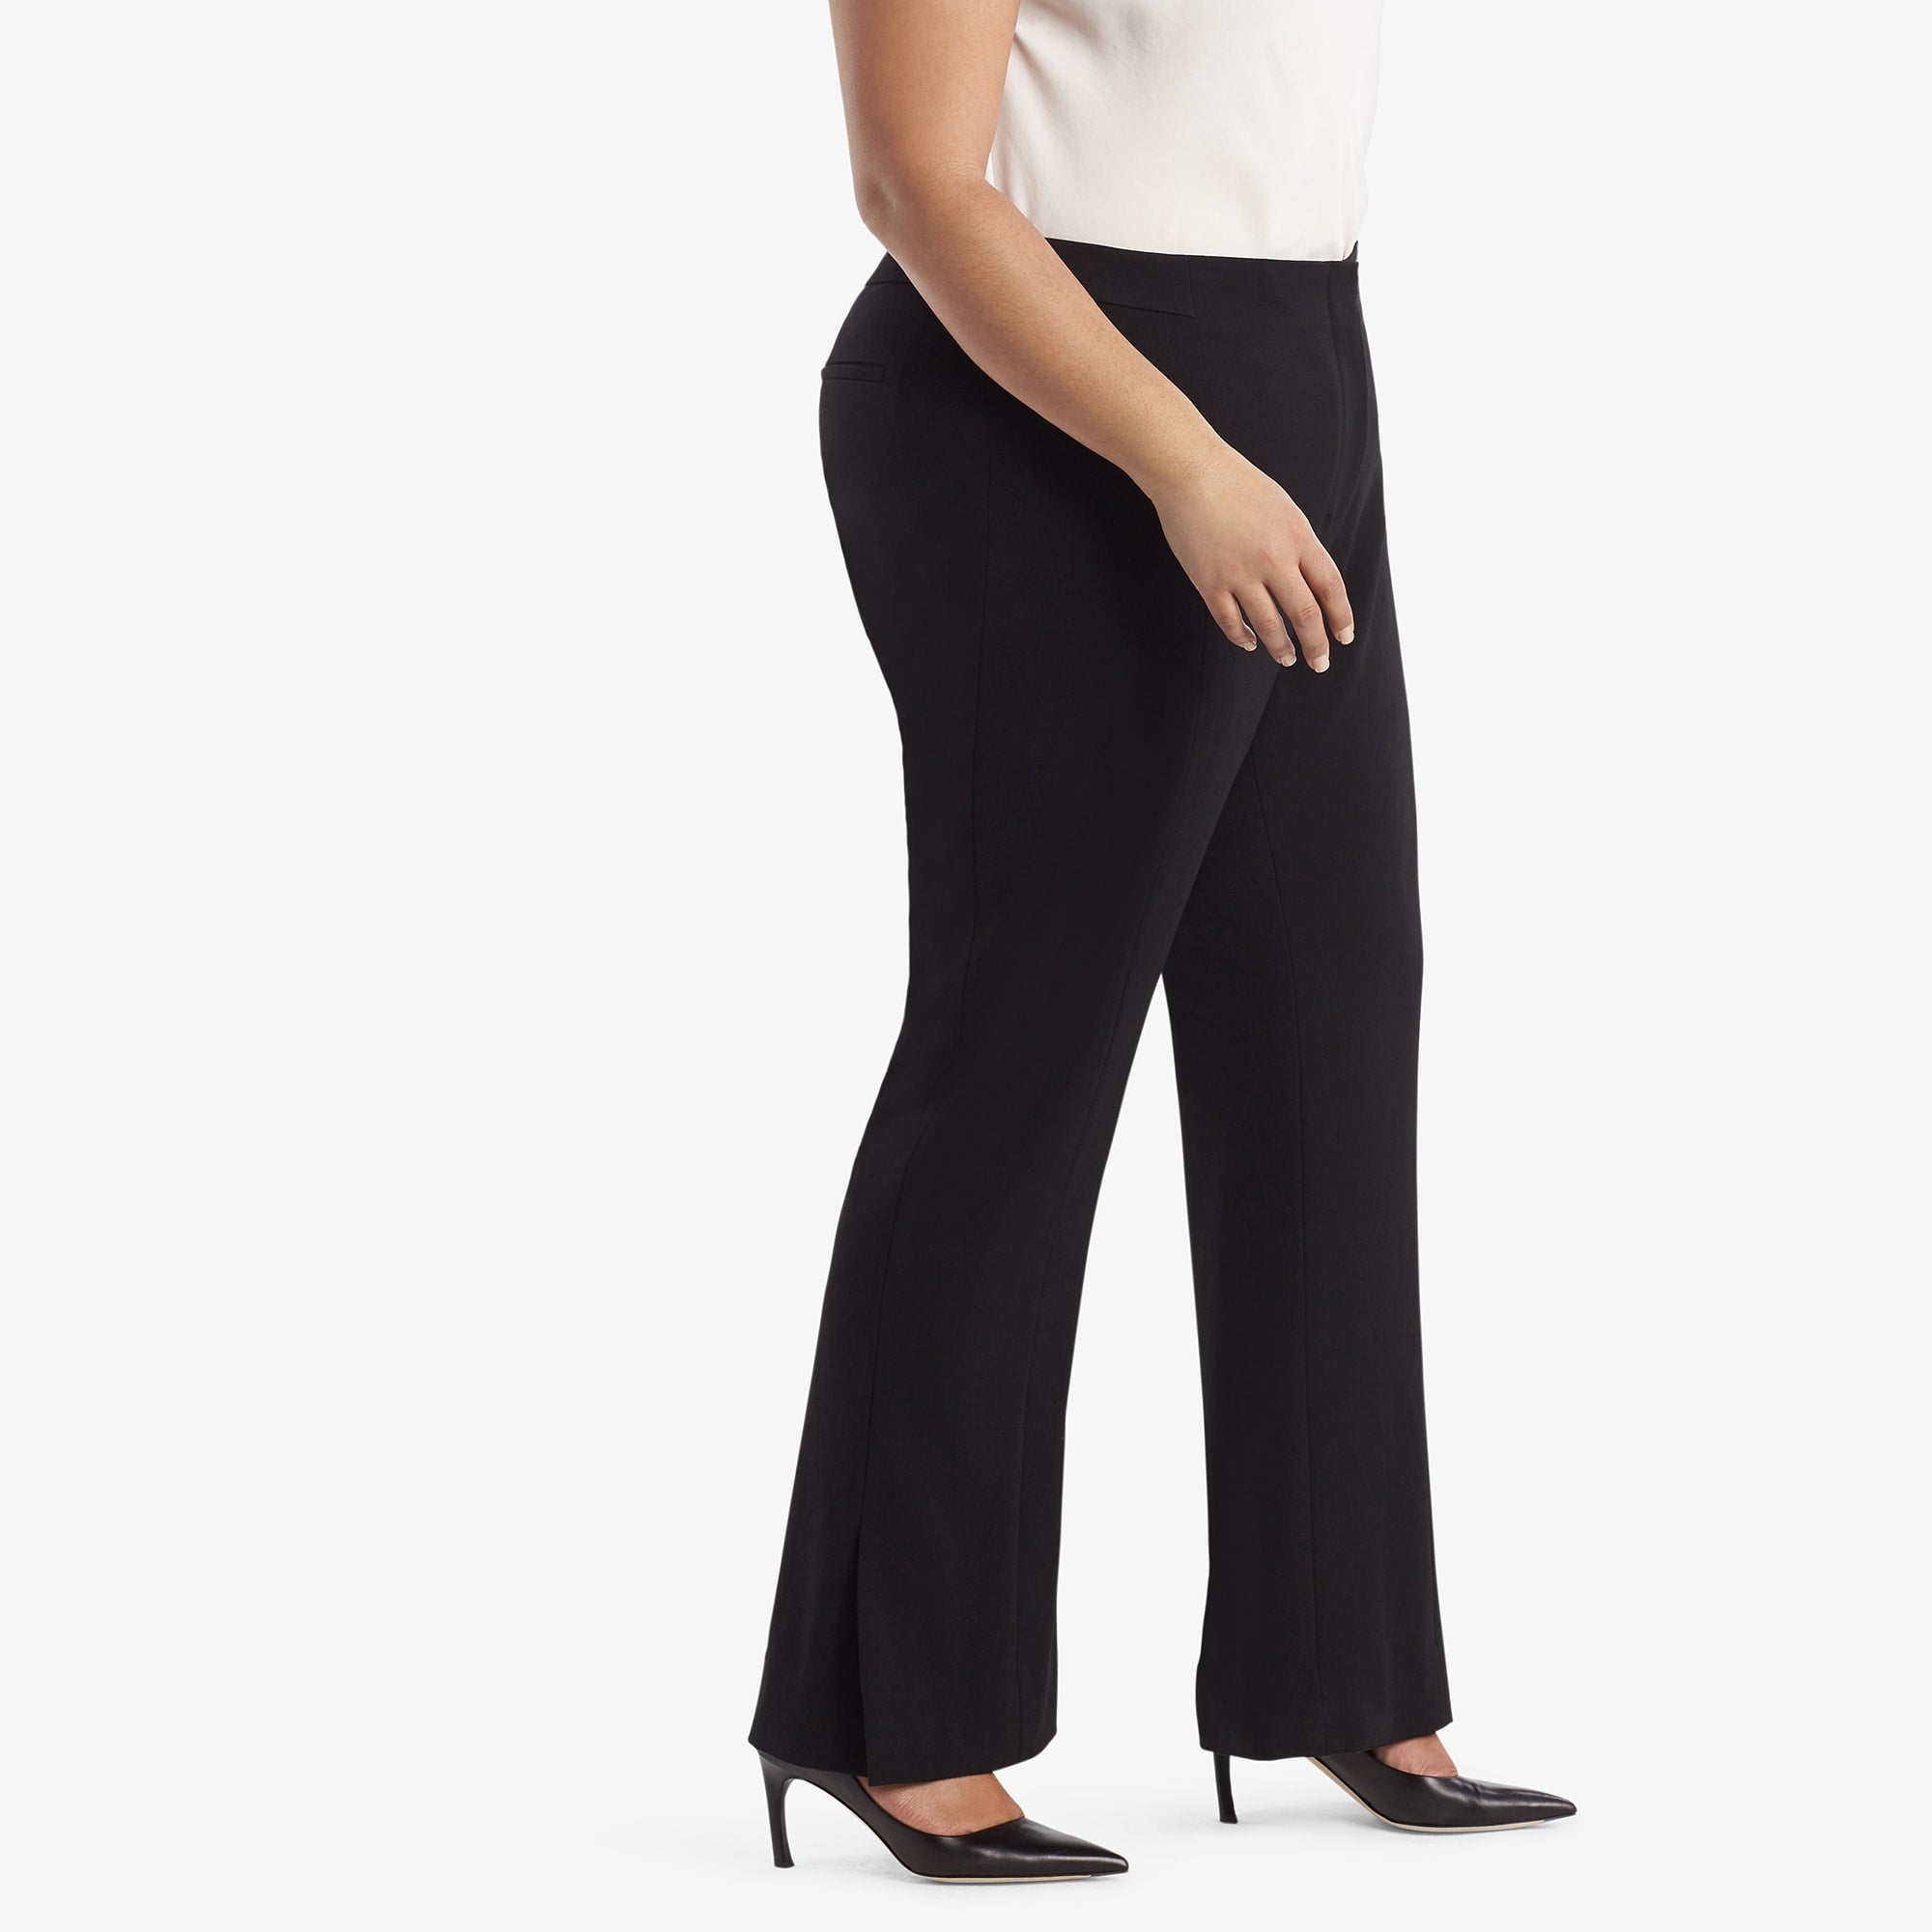 Side image of a woman standing wearing the Mercado Pant in black